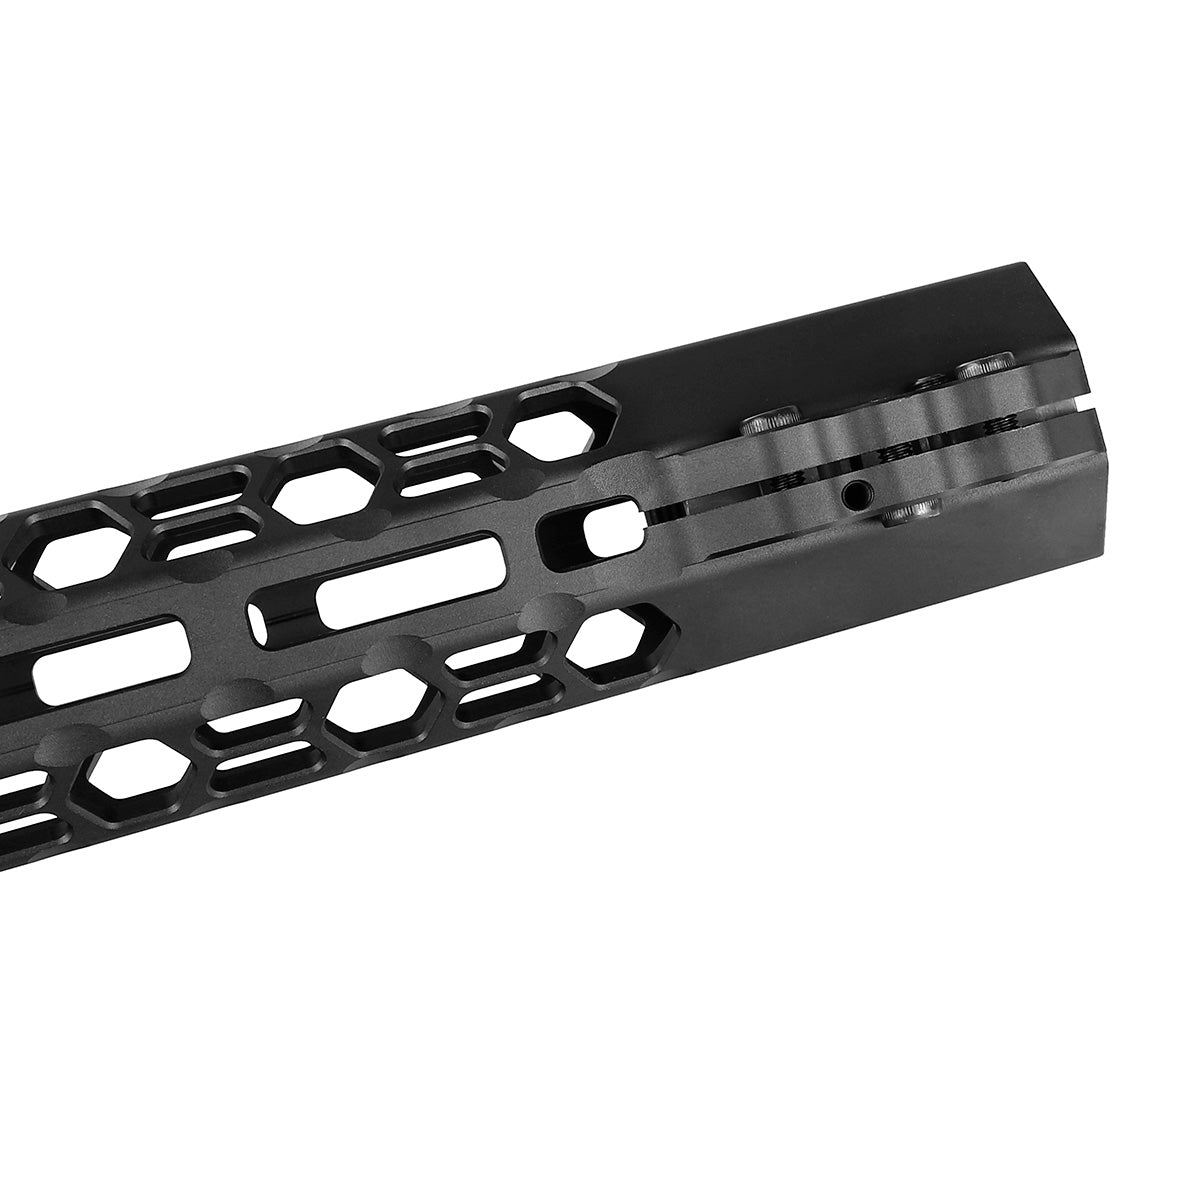 ohhunt® High Profile AR10 LR308 M-lok Free-Float Handguard with Angle Cut Front - 17 inch